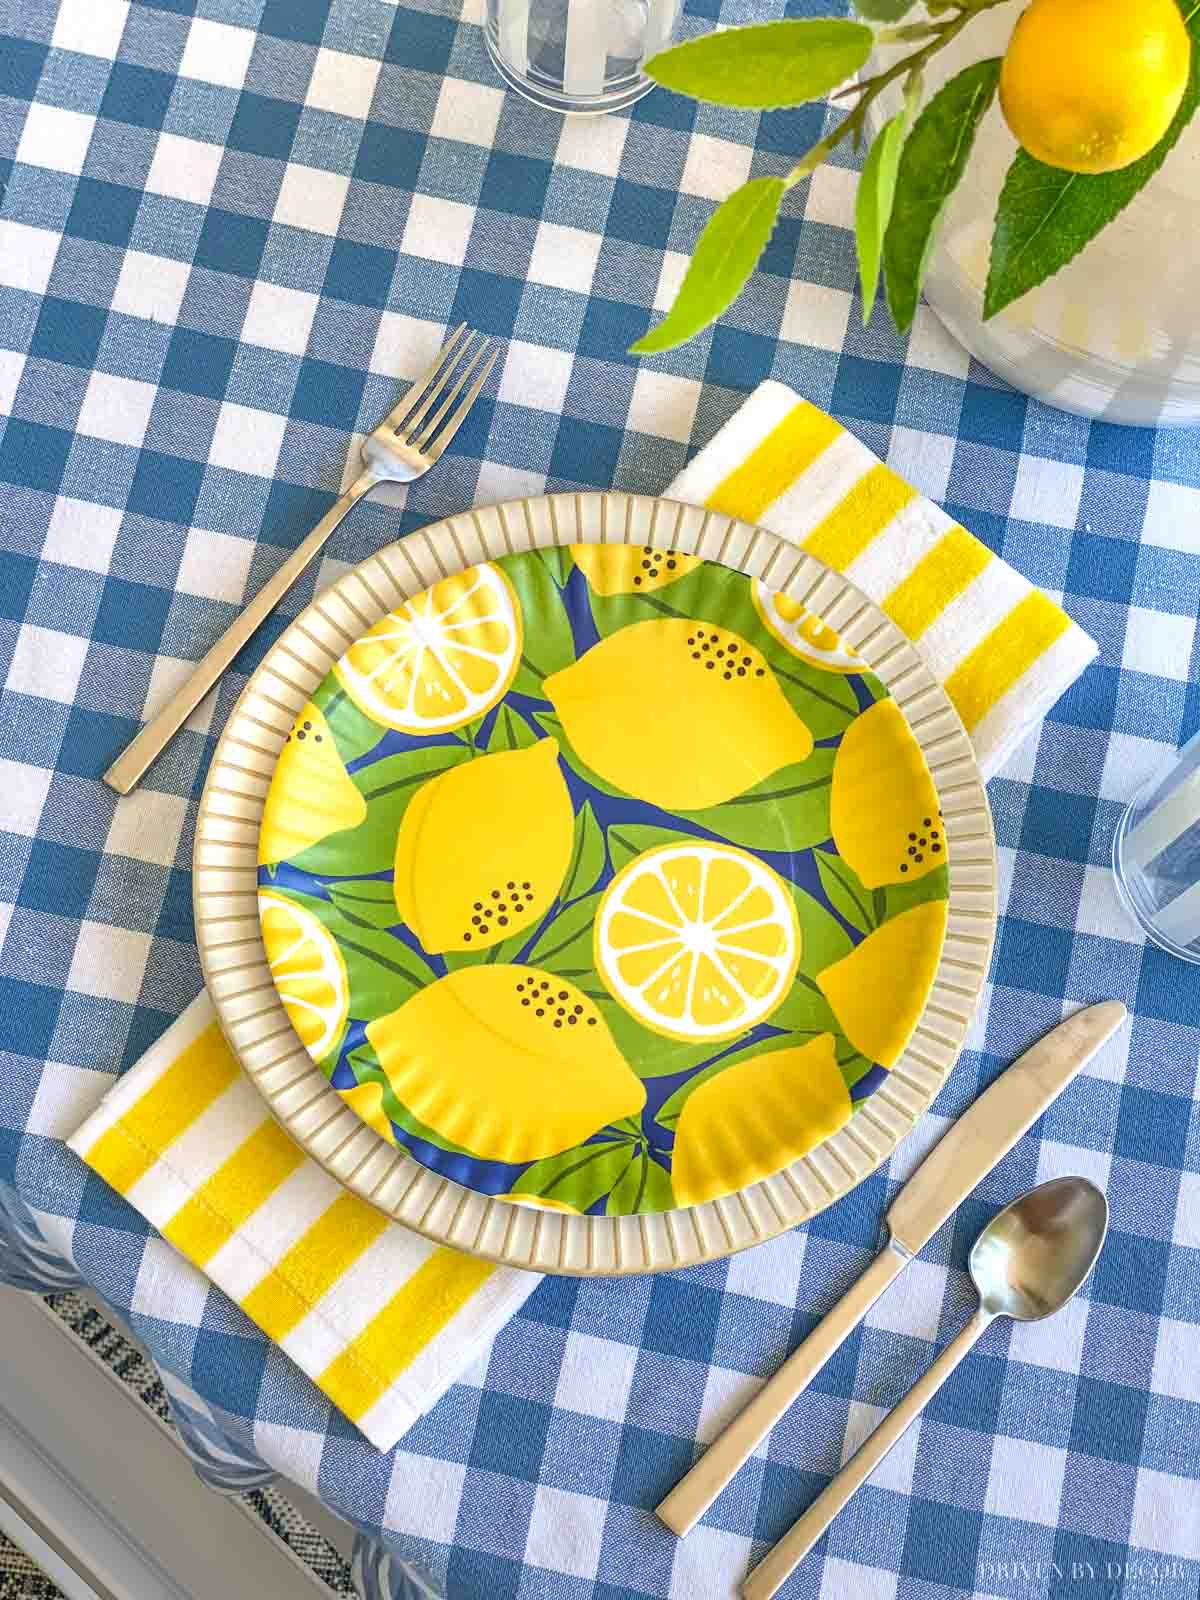 Love these melamine plates with lemon prints! Perfect for outdoor entertaining!